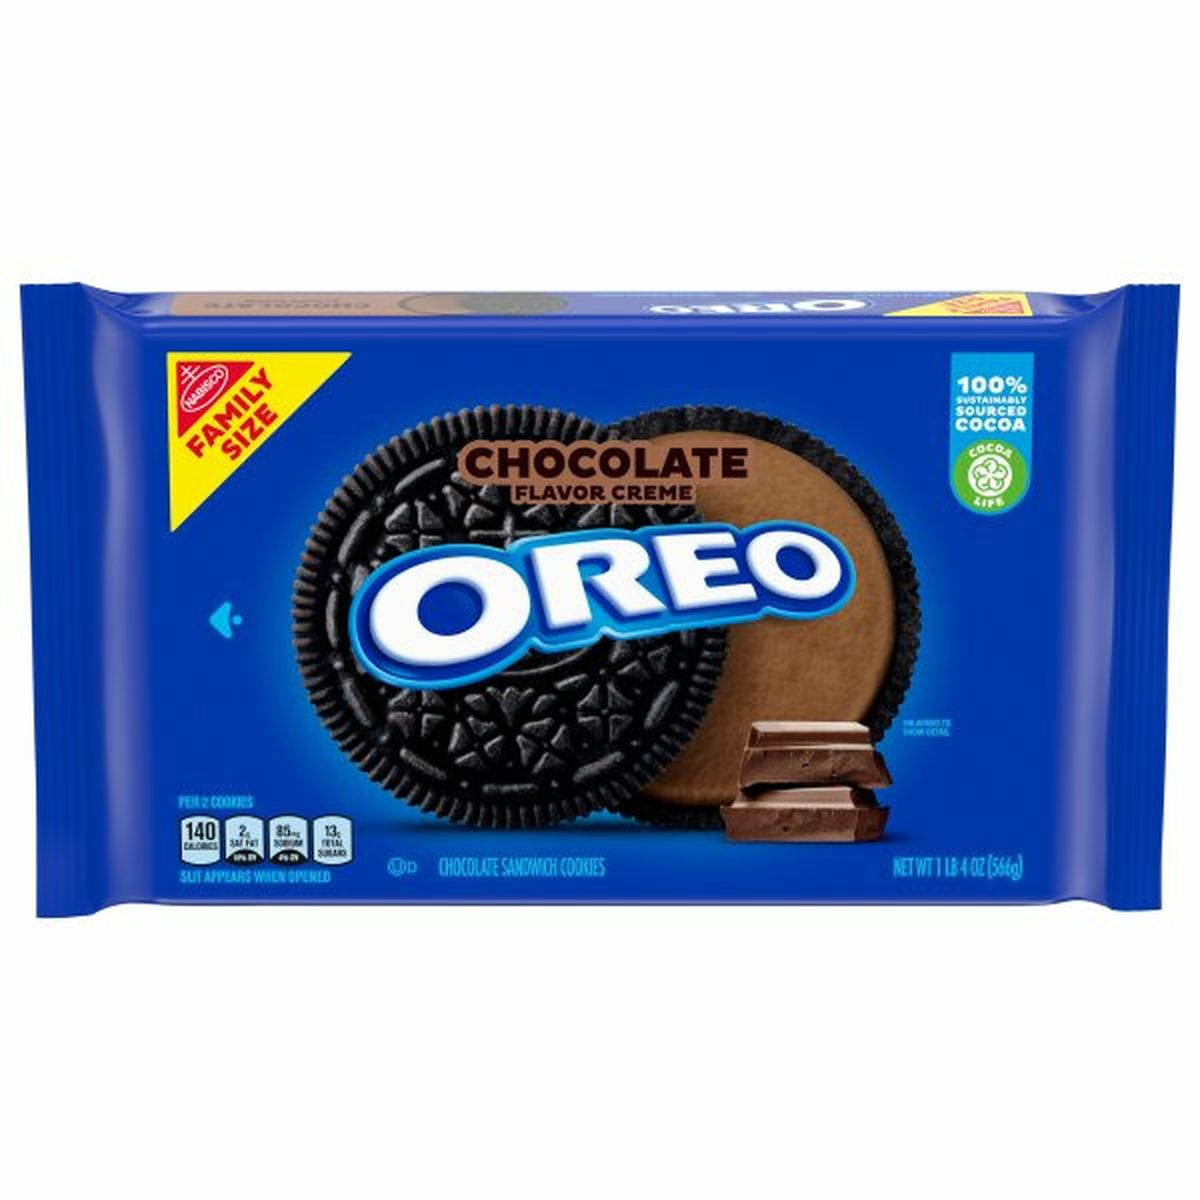 Calories in Oreo Chocolate Sandwich Cookies, Chocolate Flavor Creme, Family Size